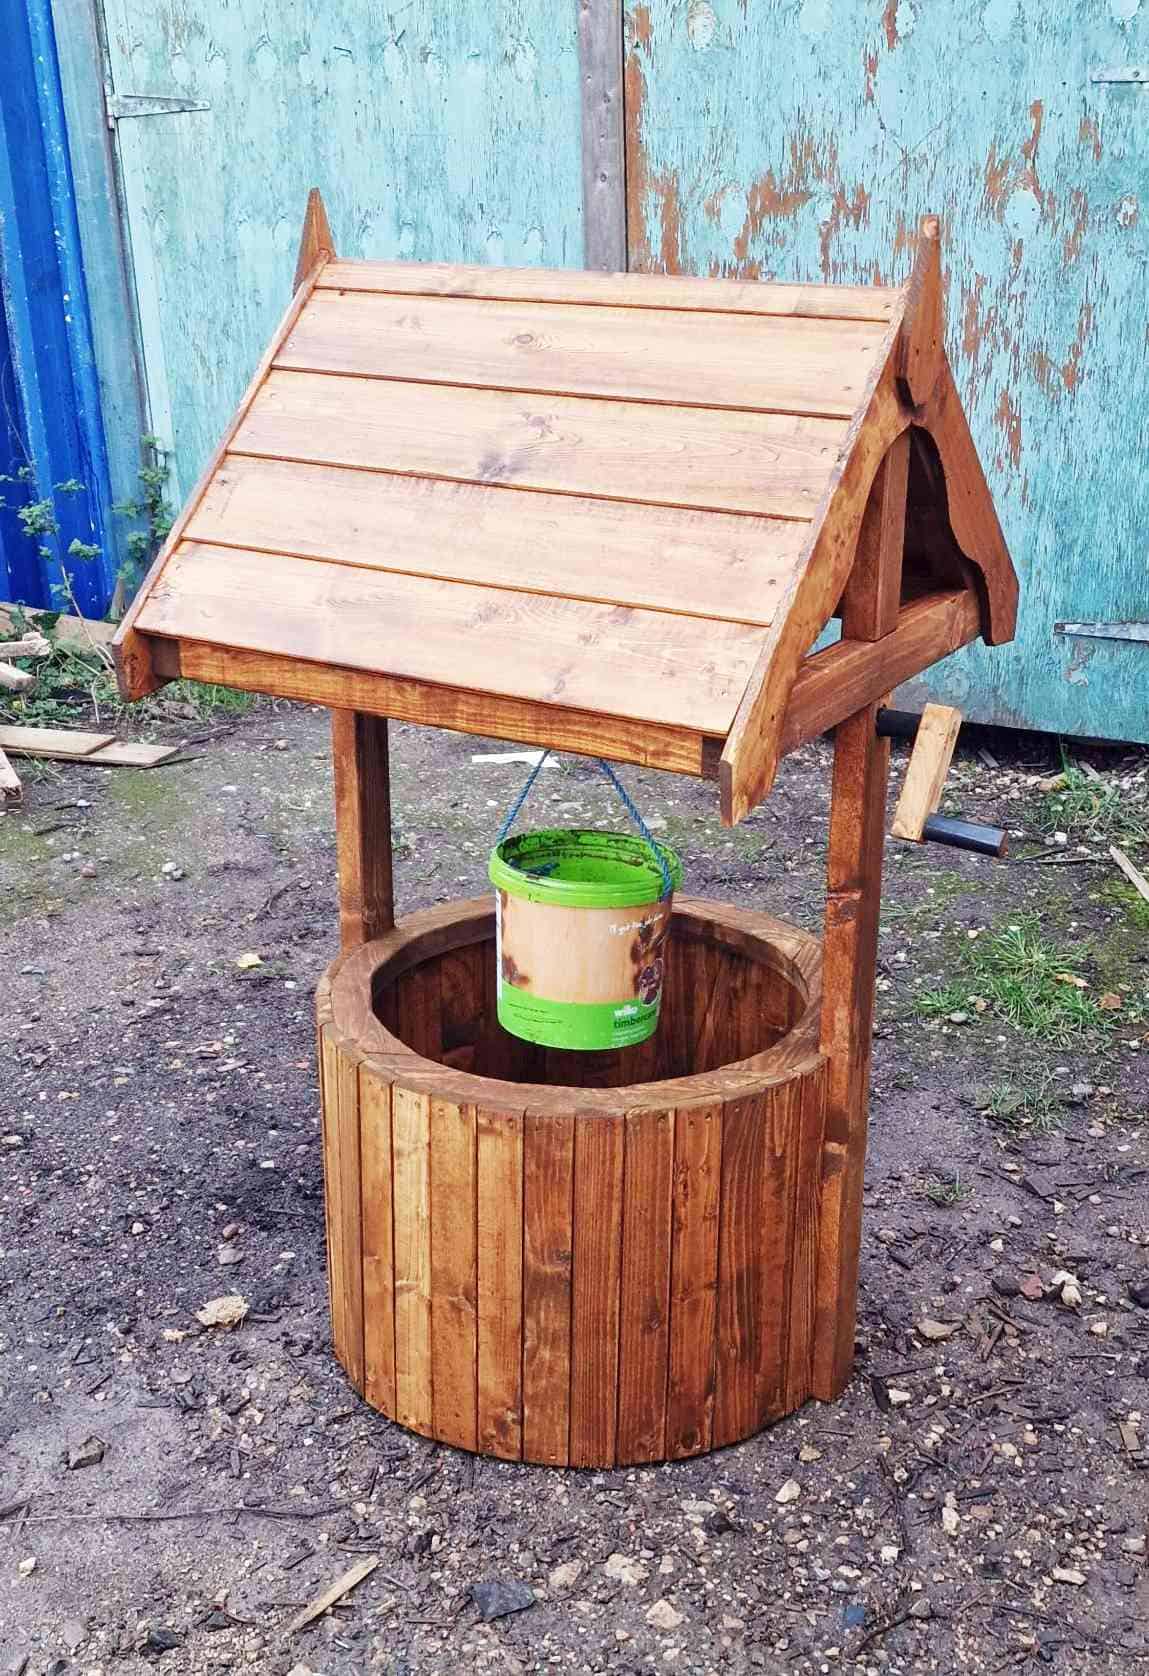 DIY Wishing Well Planter (Upcycled Cable Reel) - The Carpenter's